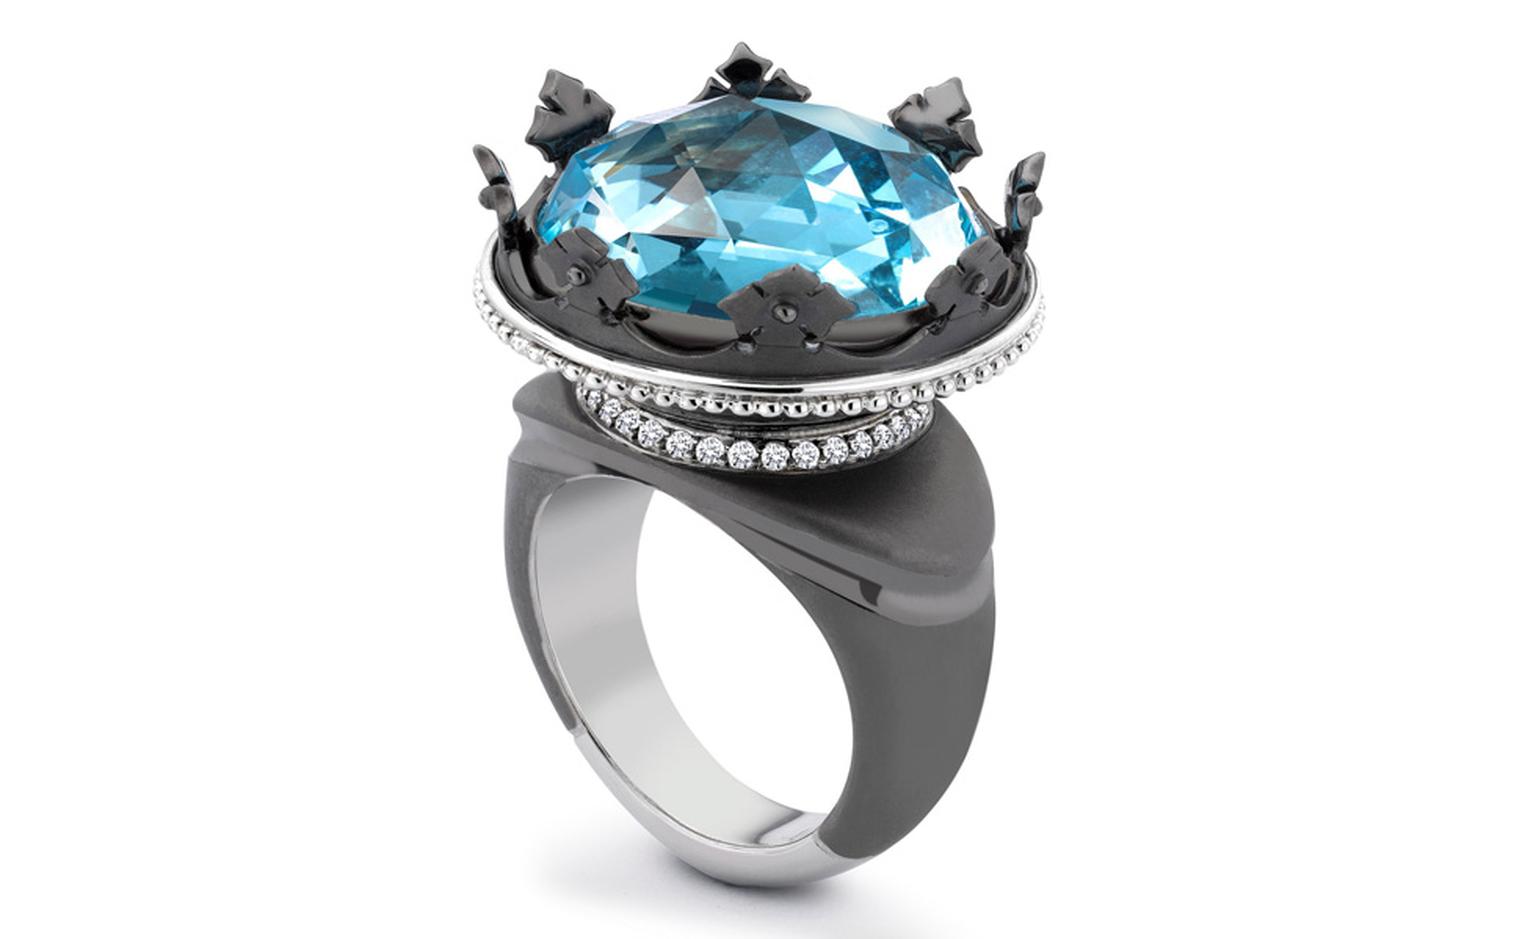 Theo Fennell 18ct White Gold Black Rhodium, Blue Topaz and Diamond Coronet Ring £11,900